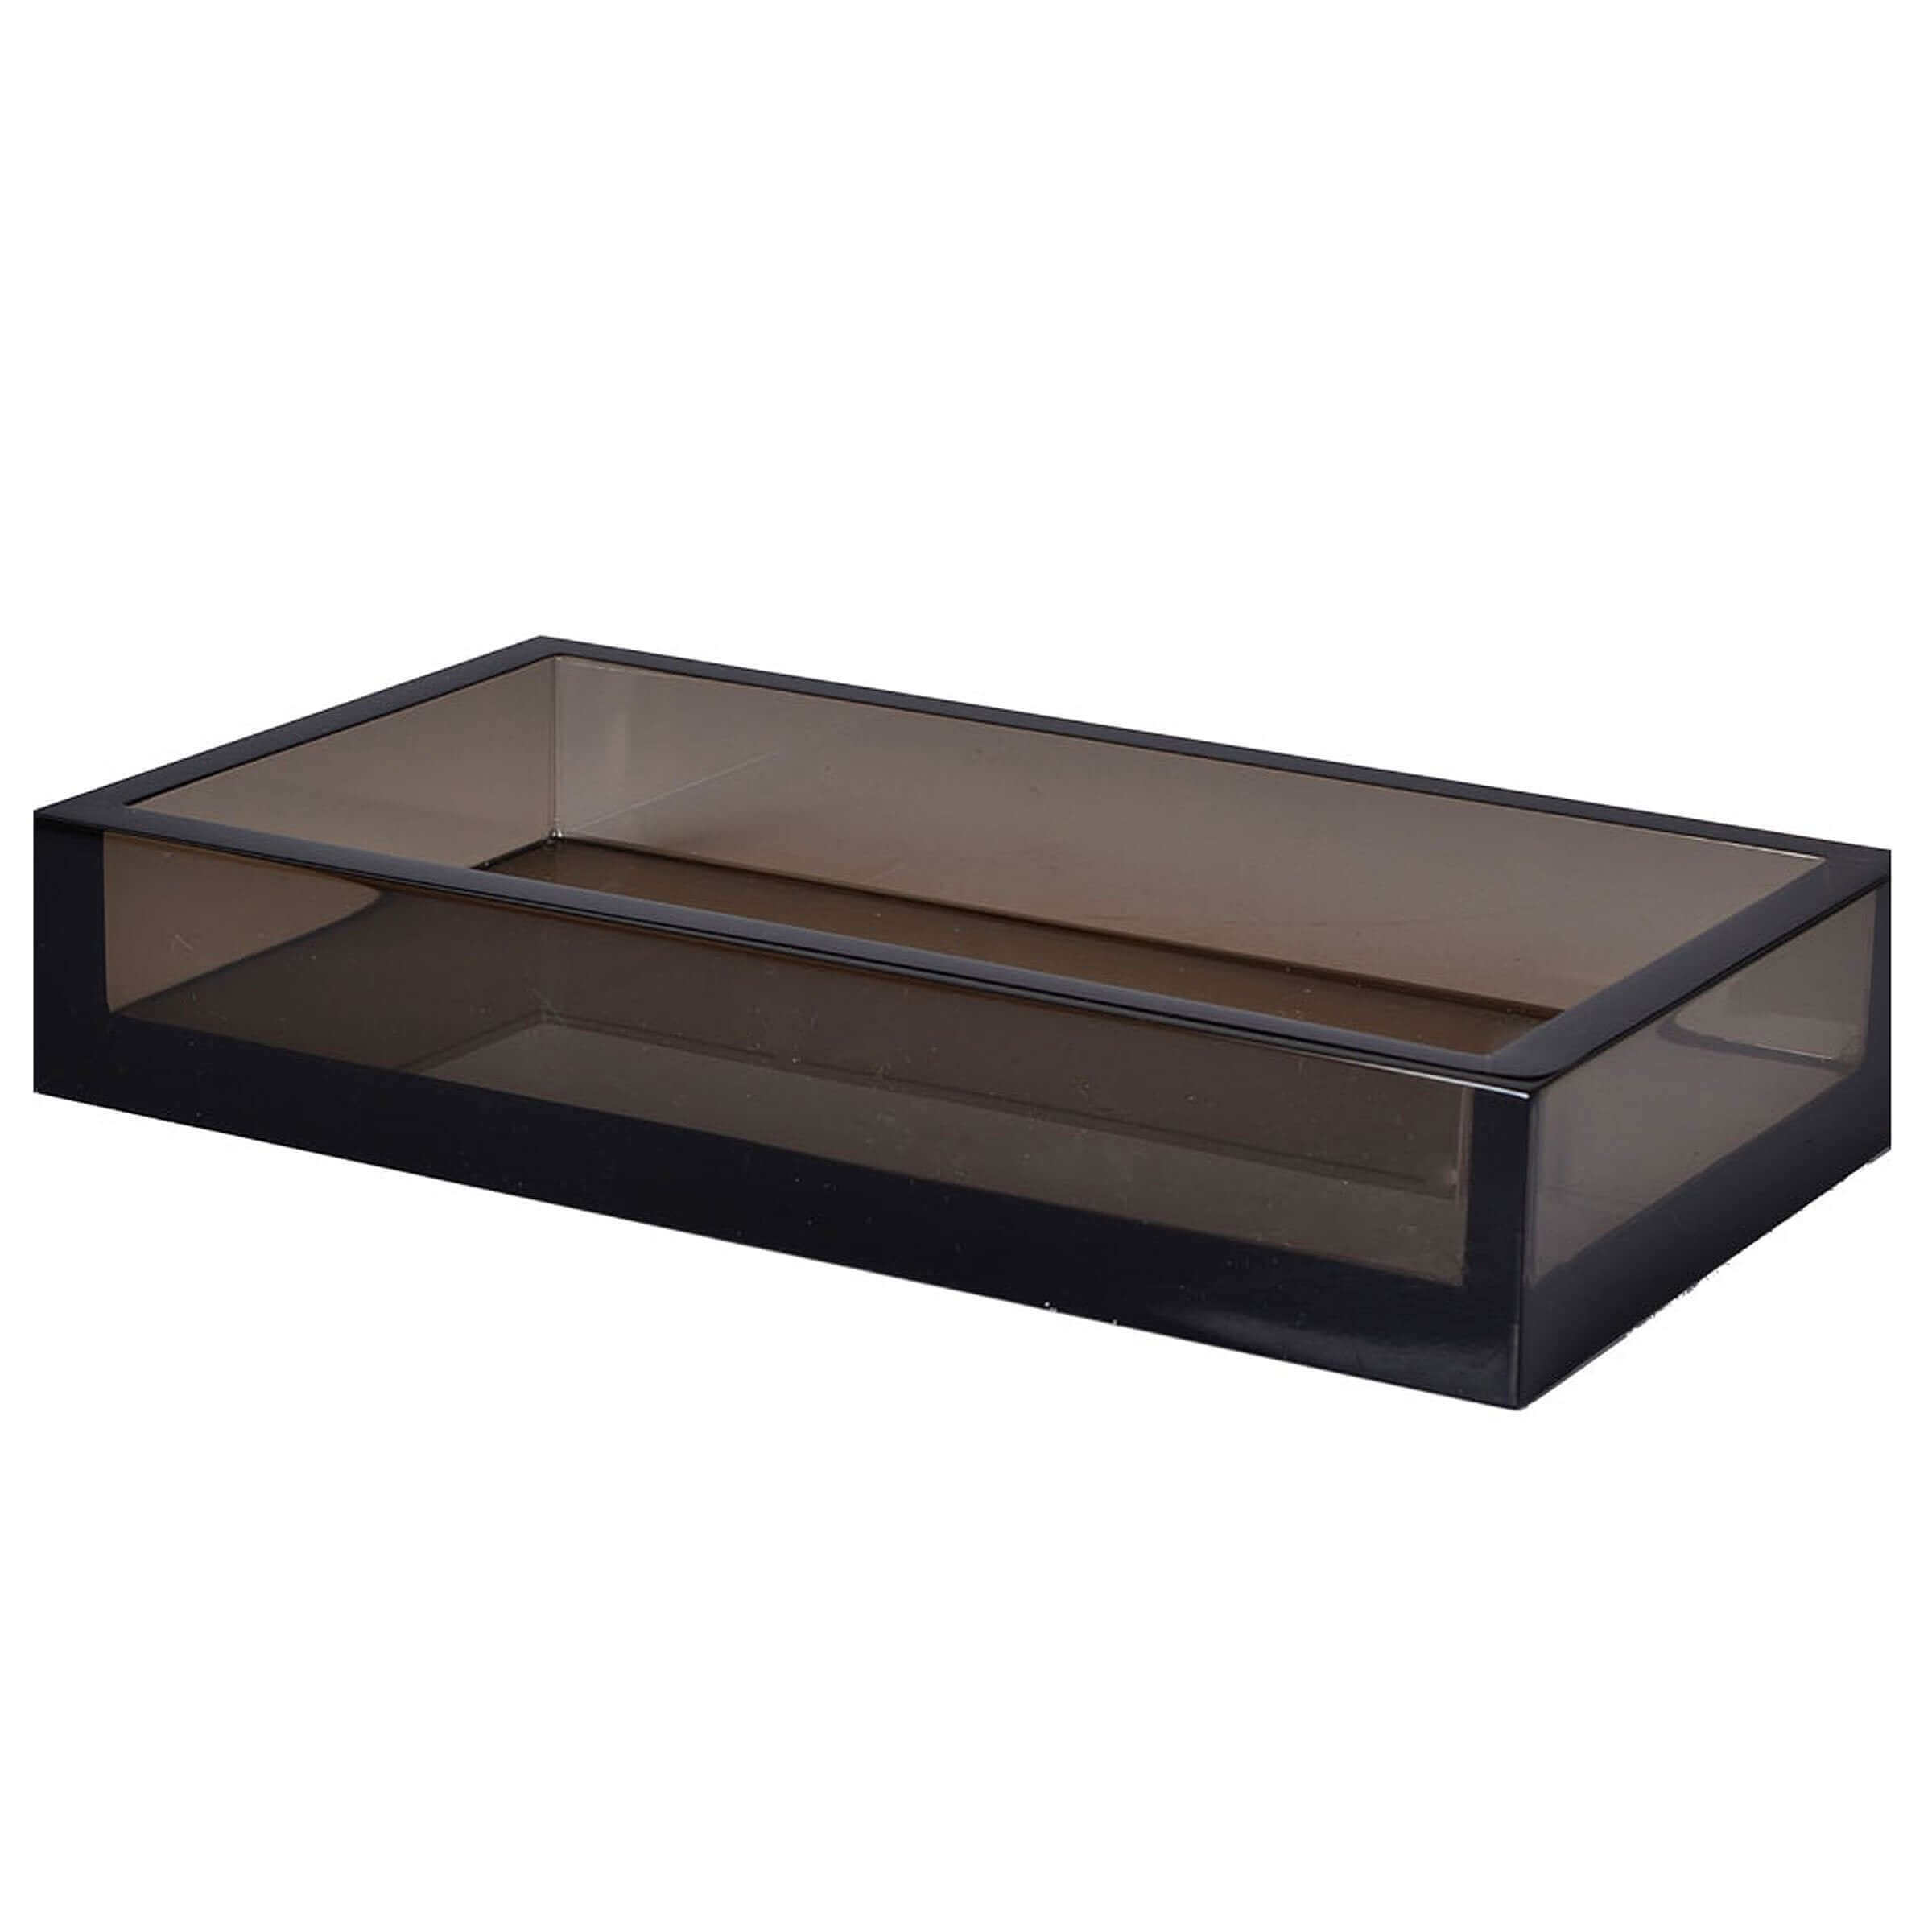 Mike + Ally - Ice Smoked Vanity tray - 31235 - Brown - 